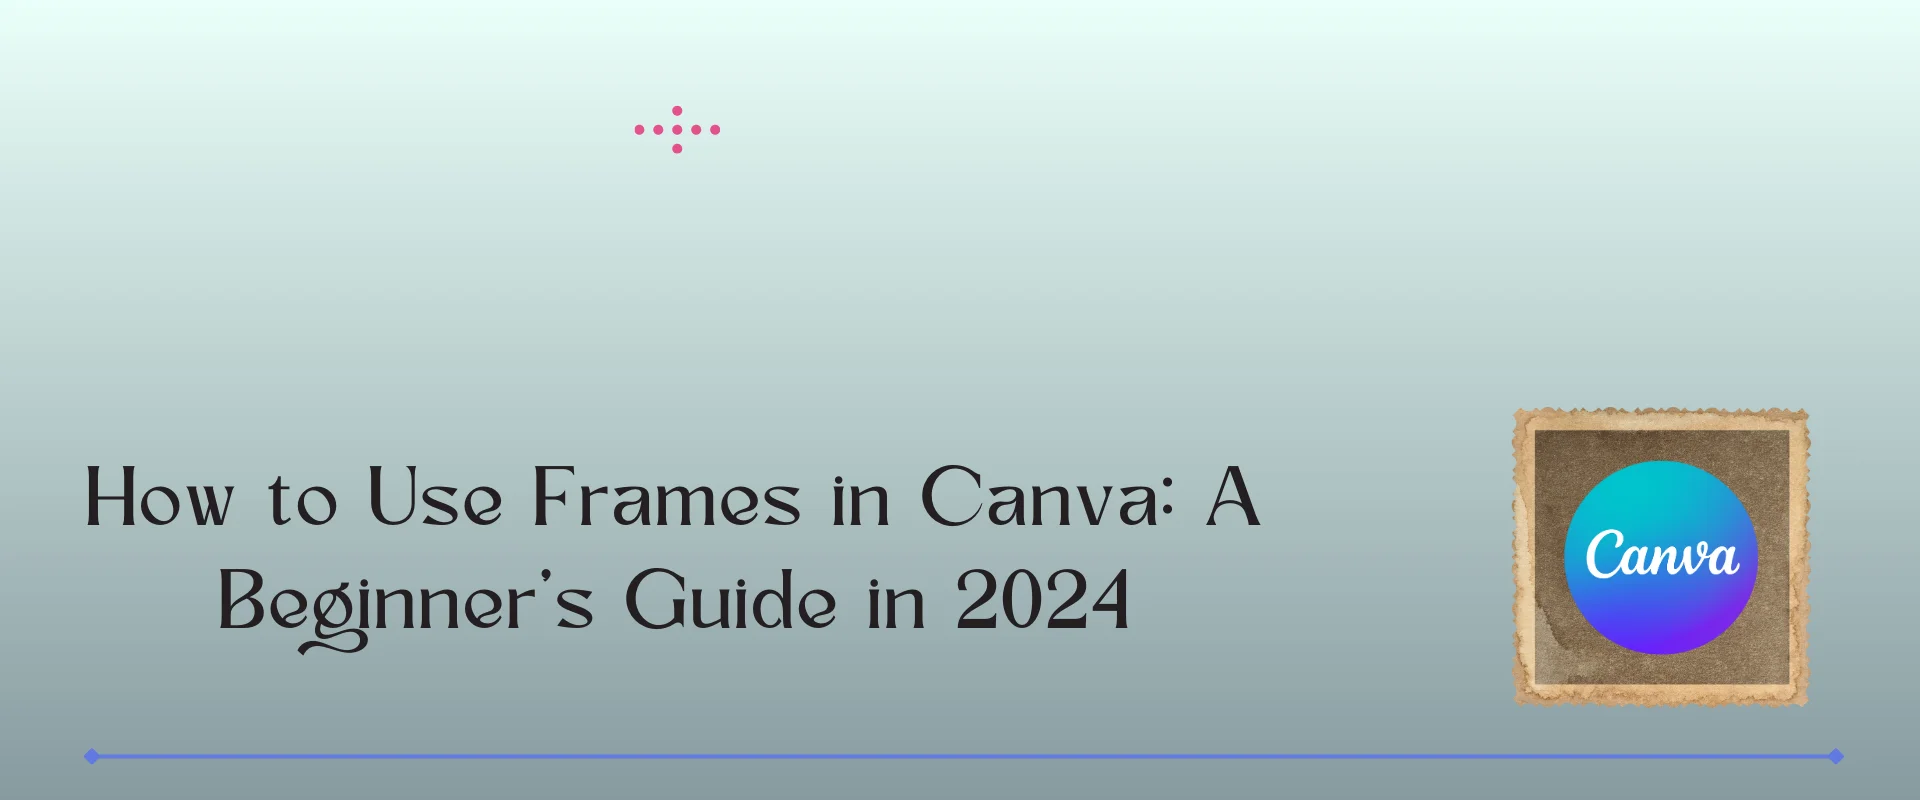 How to Use Frames in Canva: 3 Step Beginner’s Guide